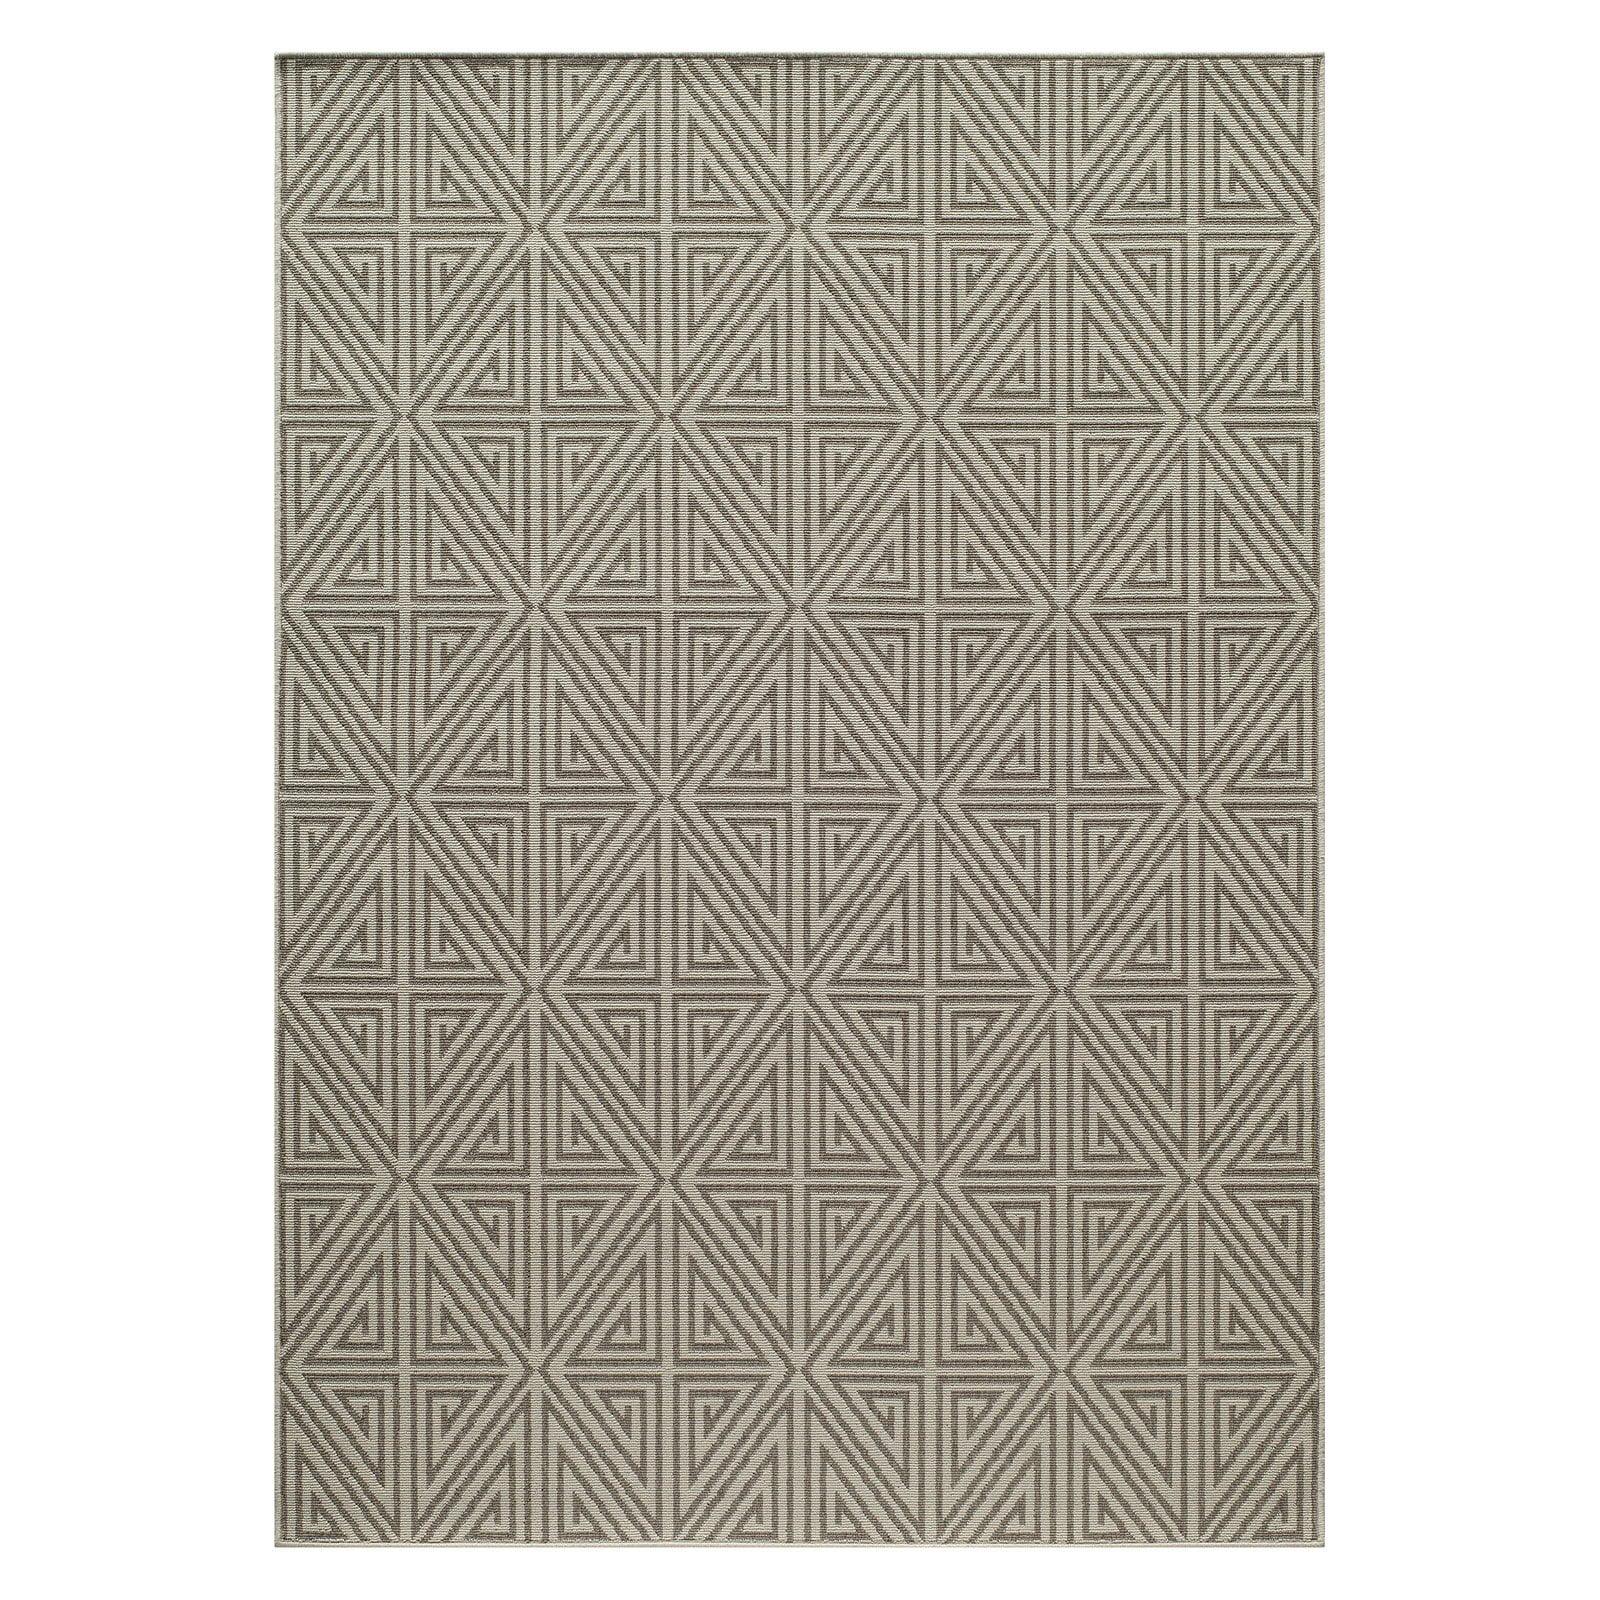 Taupe Geometric Easy-Care Rectangular Synthetic Rug 5'3" x 7'6"